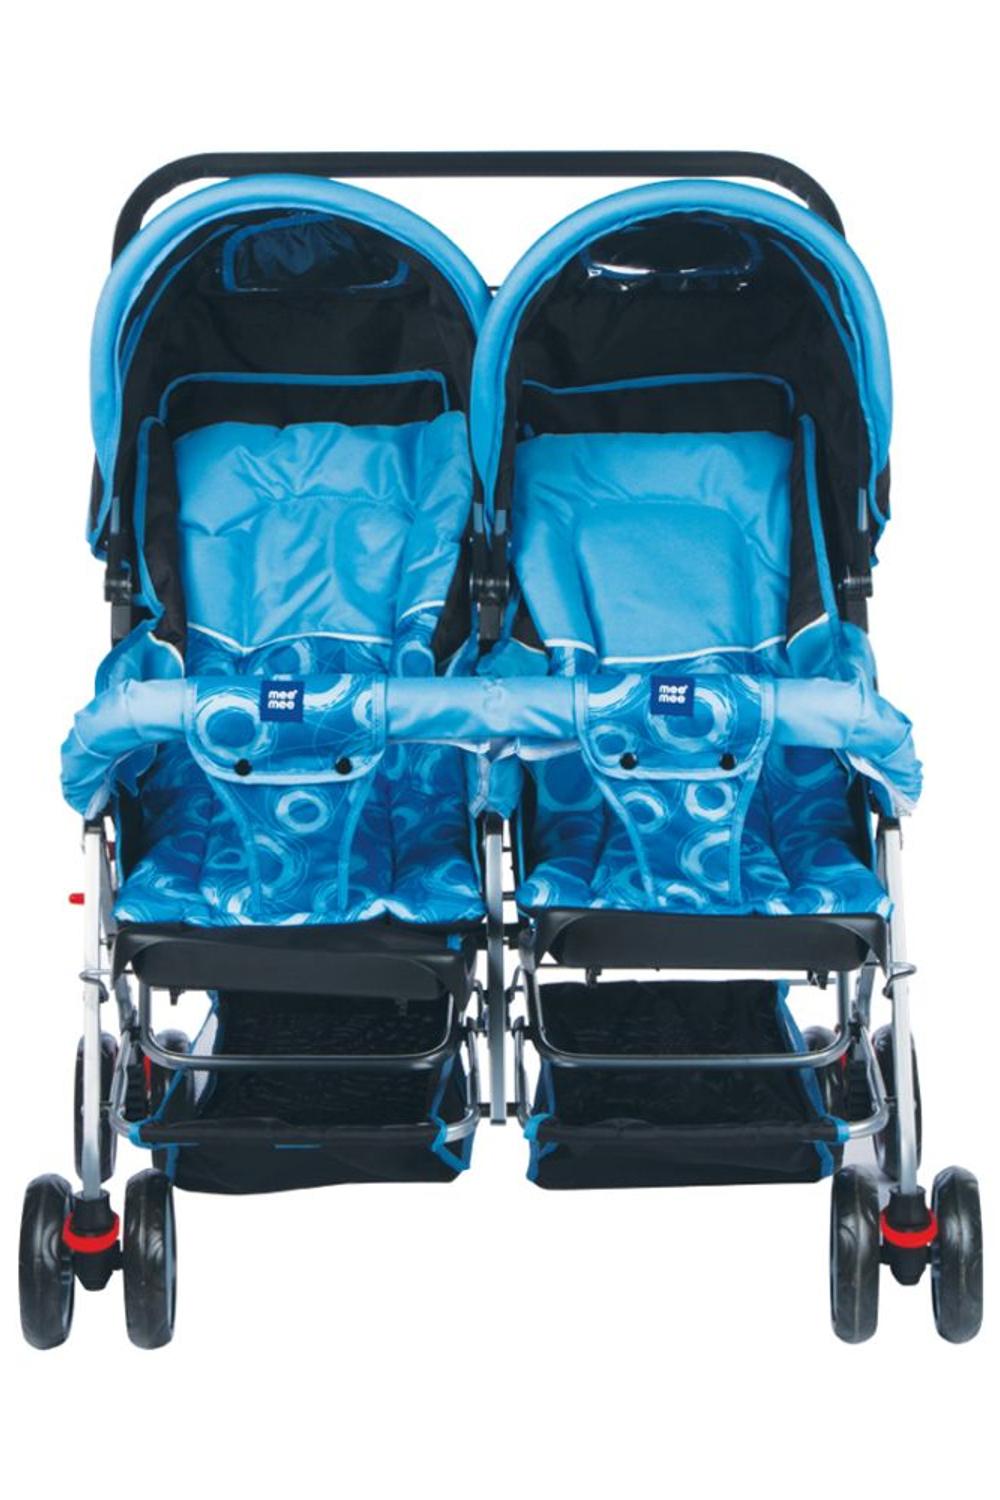 Mee Mee Comfortable Twin Baby Pram with 3 seating position | Compact Folding - Blue